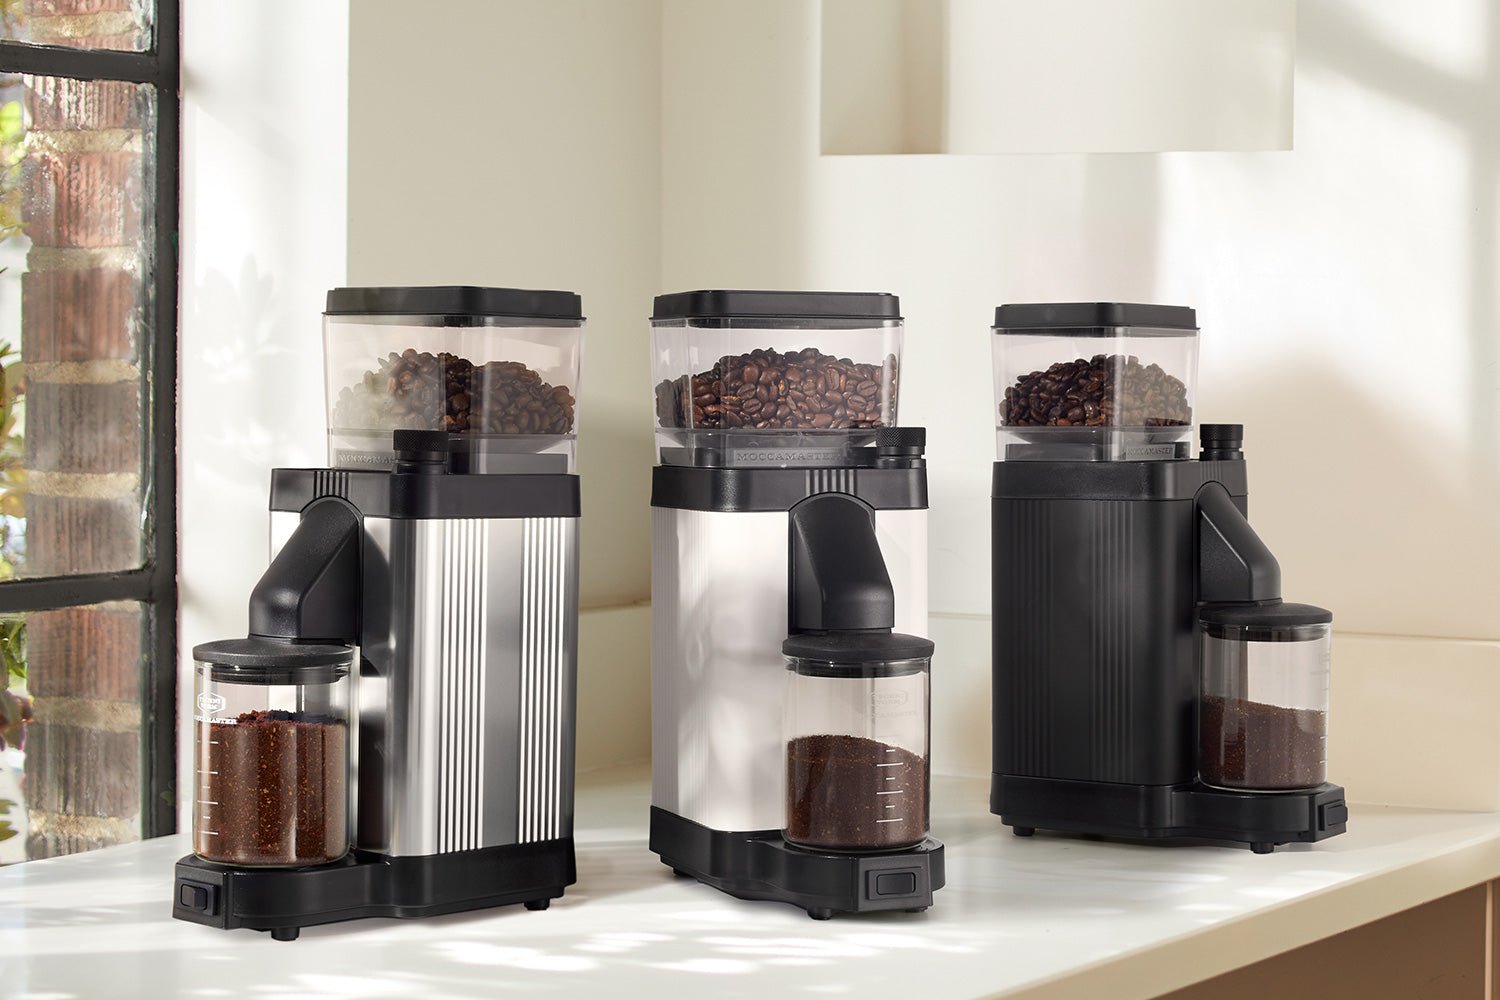 Moccamaster USA Launches the Moccamaster KM5 Burr Grinder